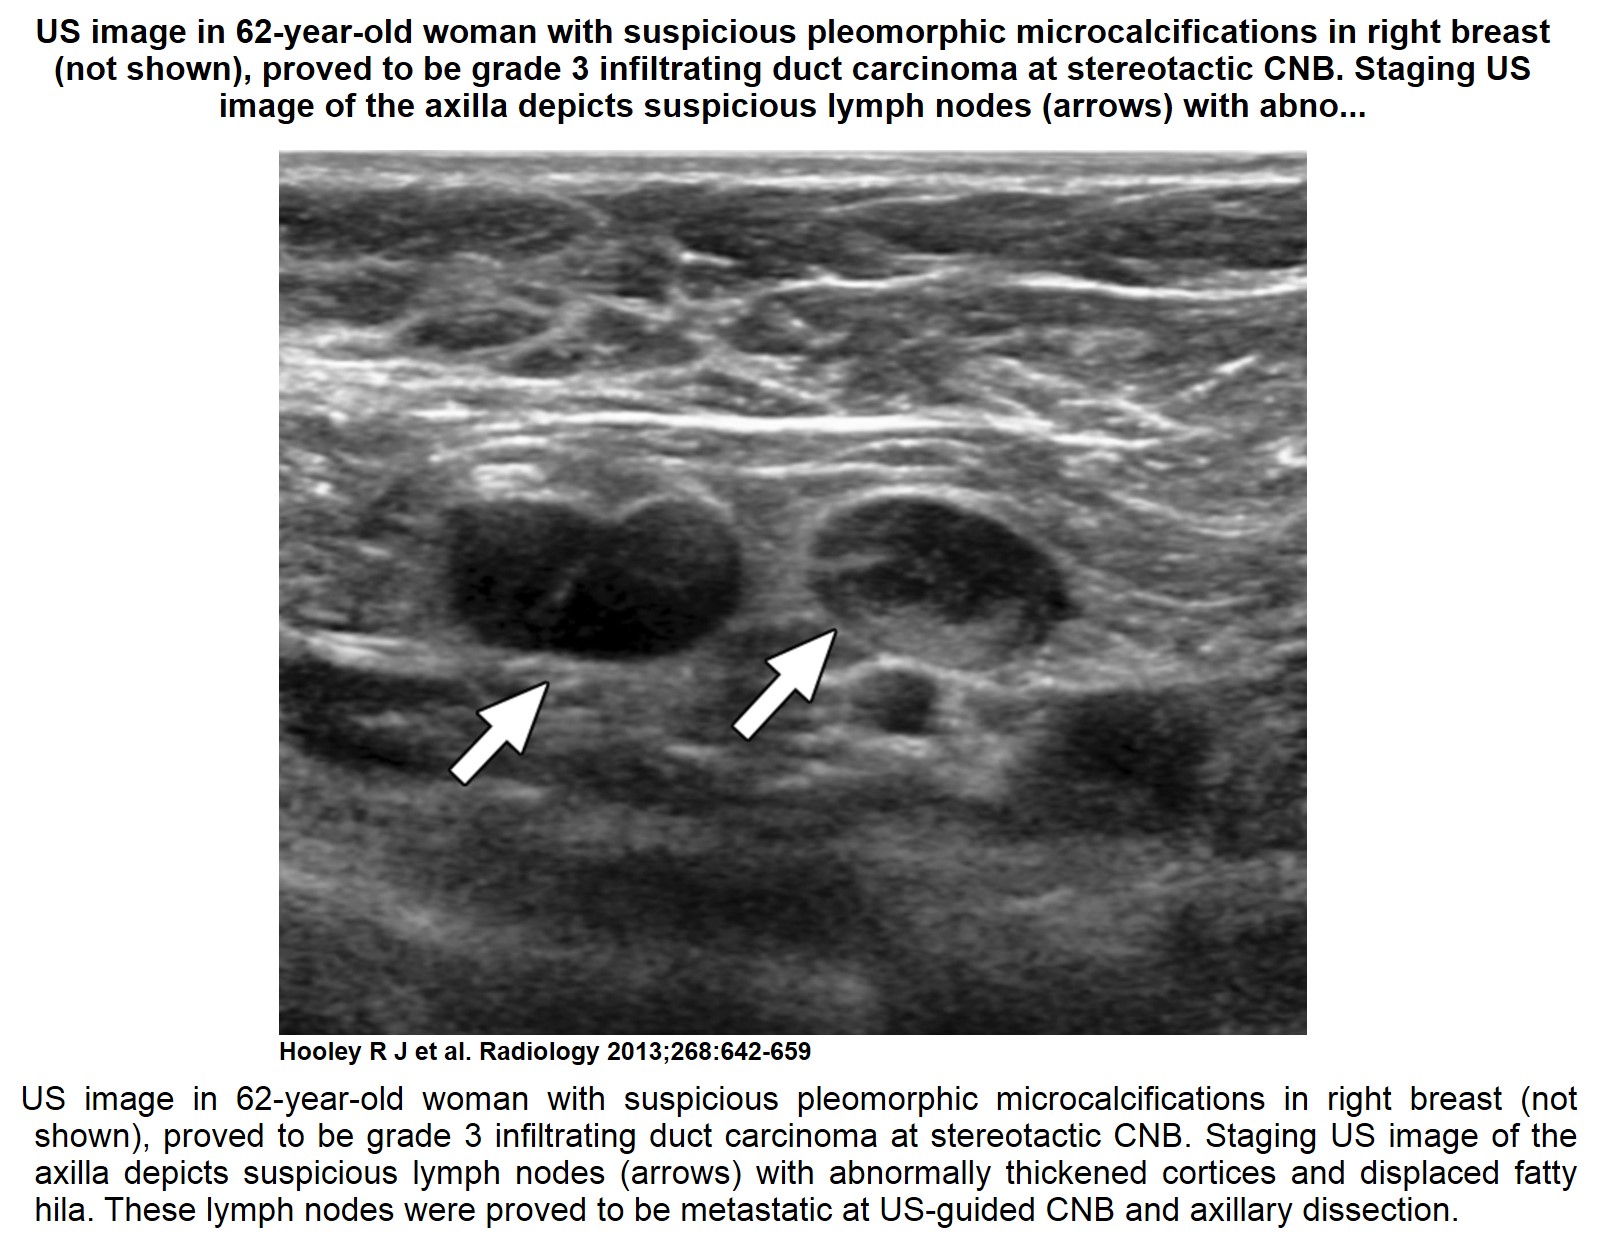 Recent comprehensive review on the role of ultrasound in breast cancer management  Leaders in 